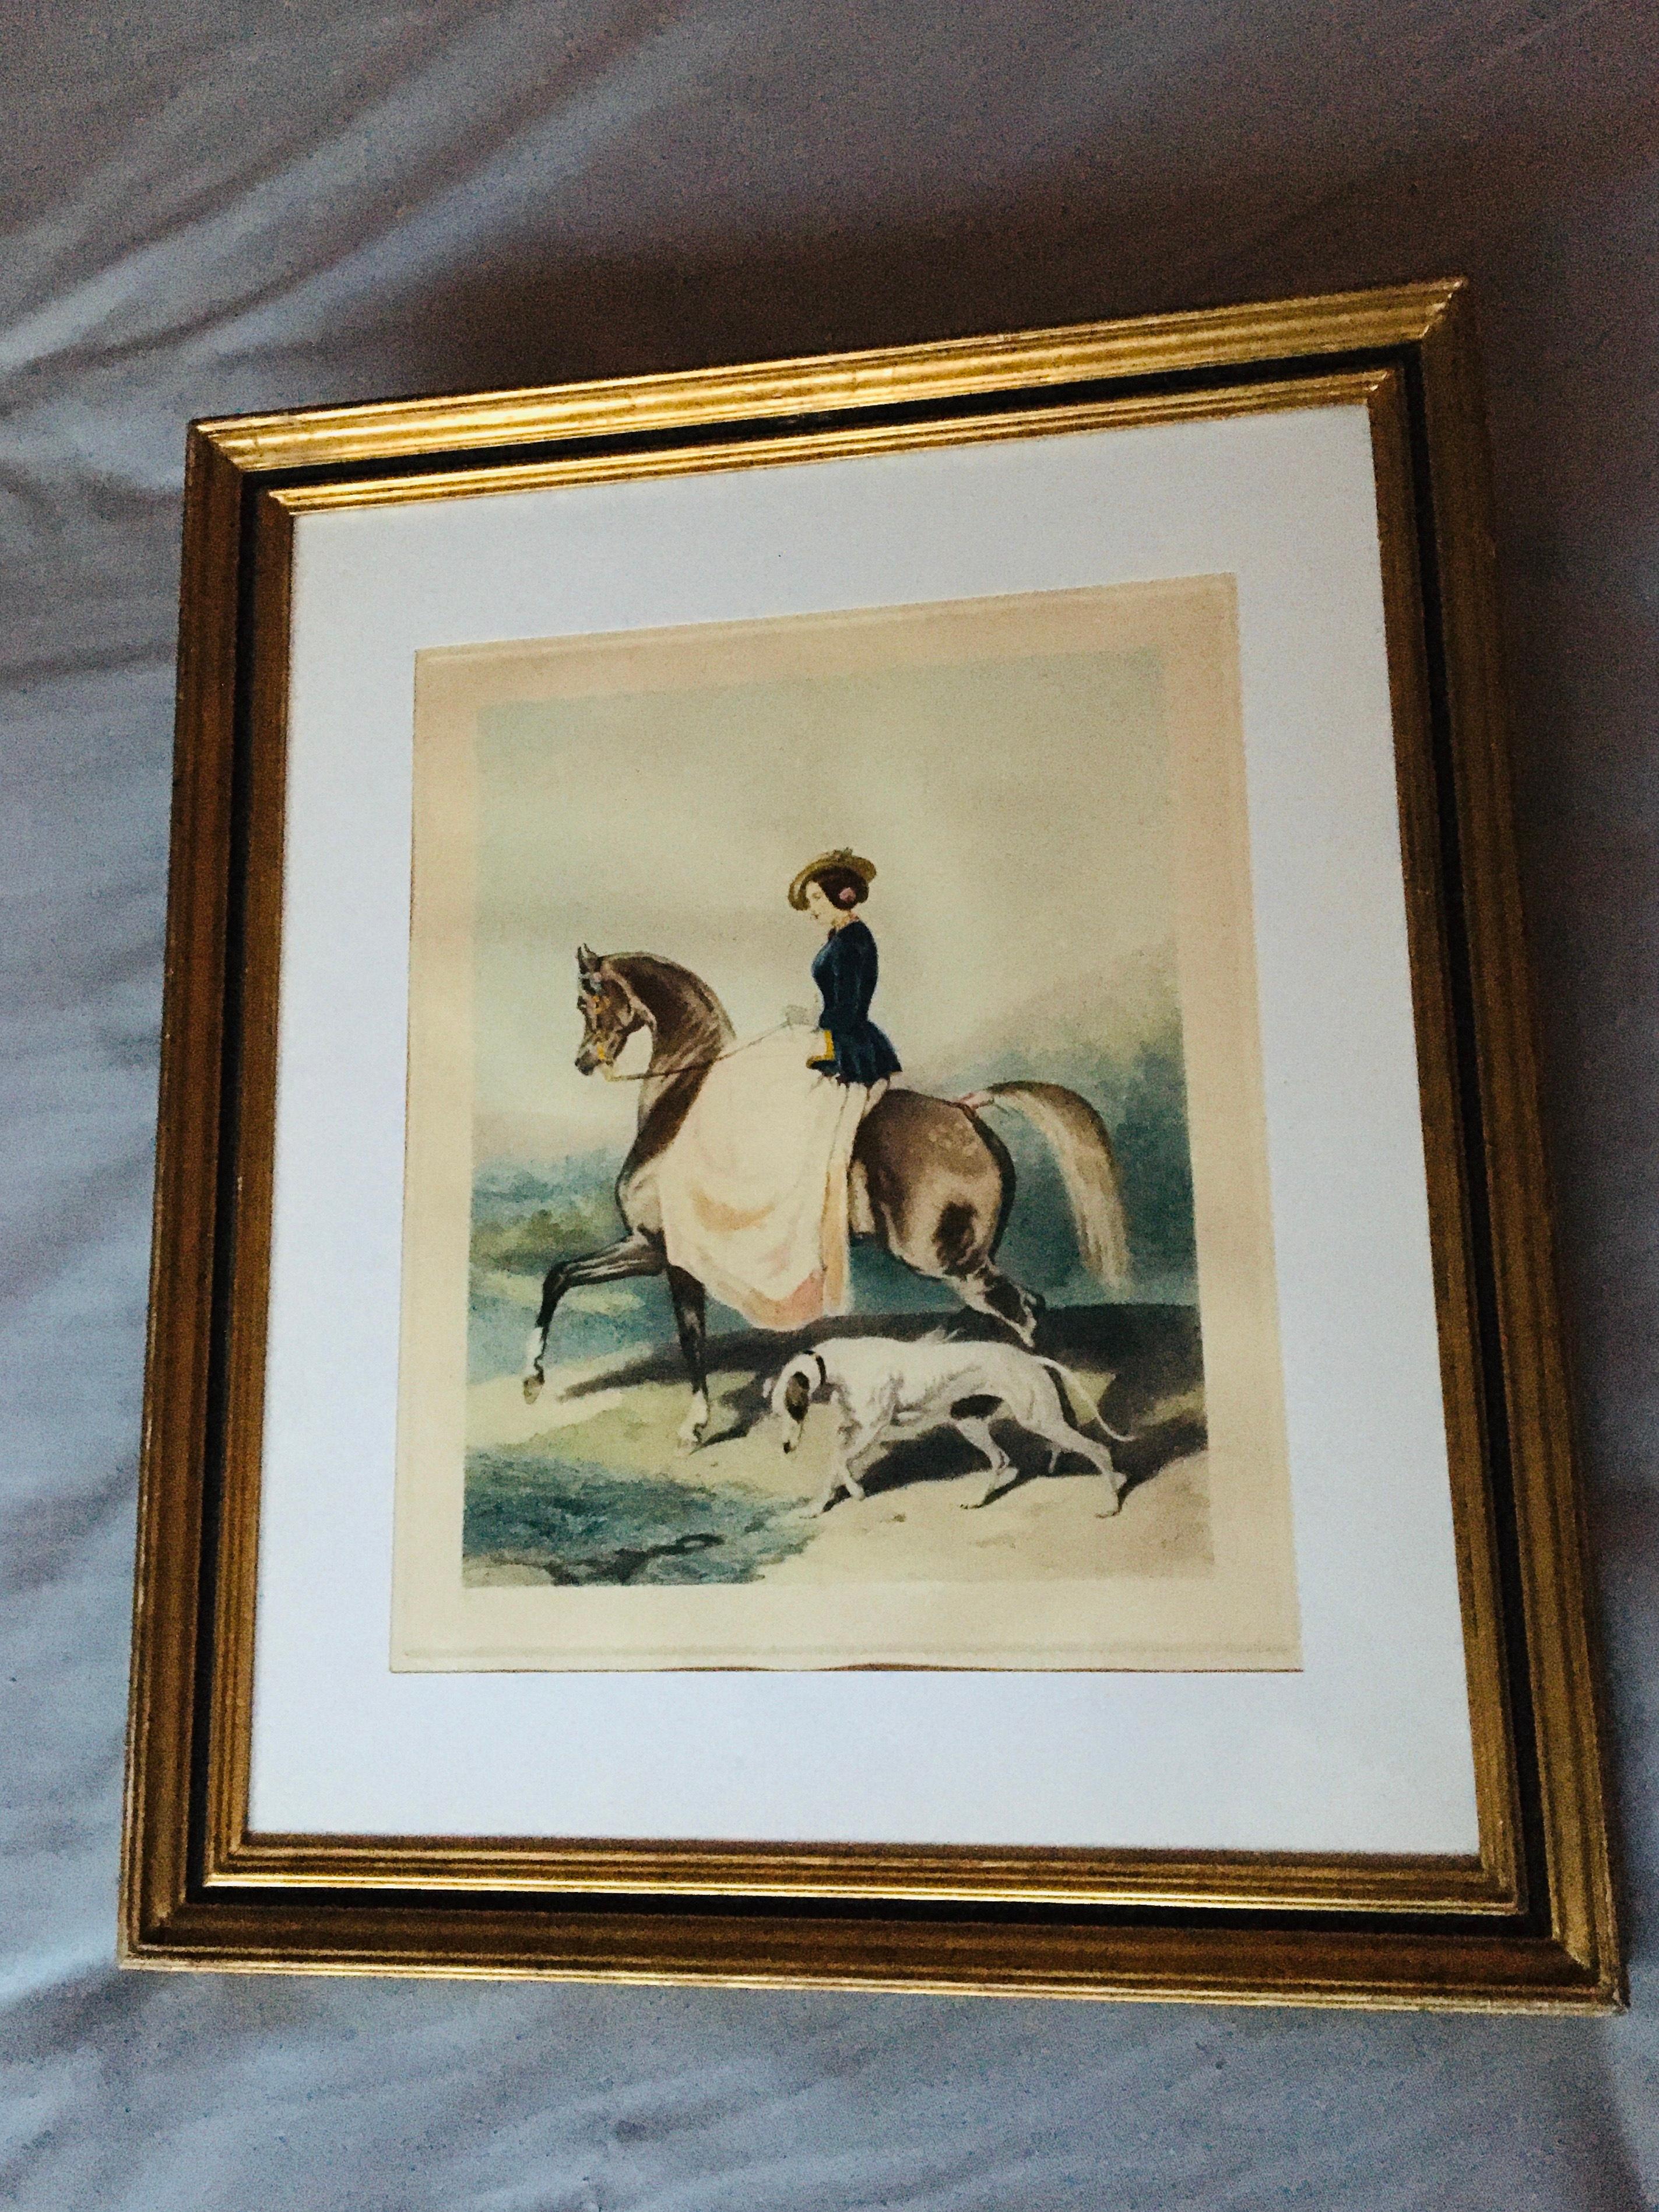 The Horsewoman and her Greyhound - Gray Animal Print by Alfred de Dreux